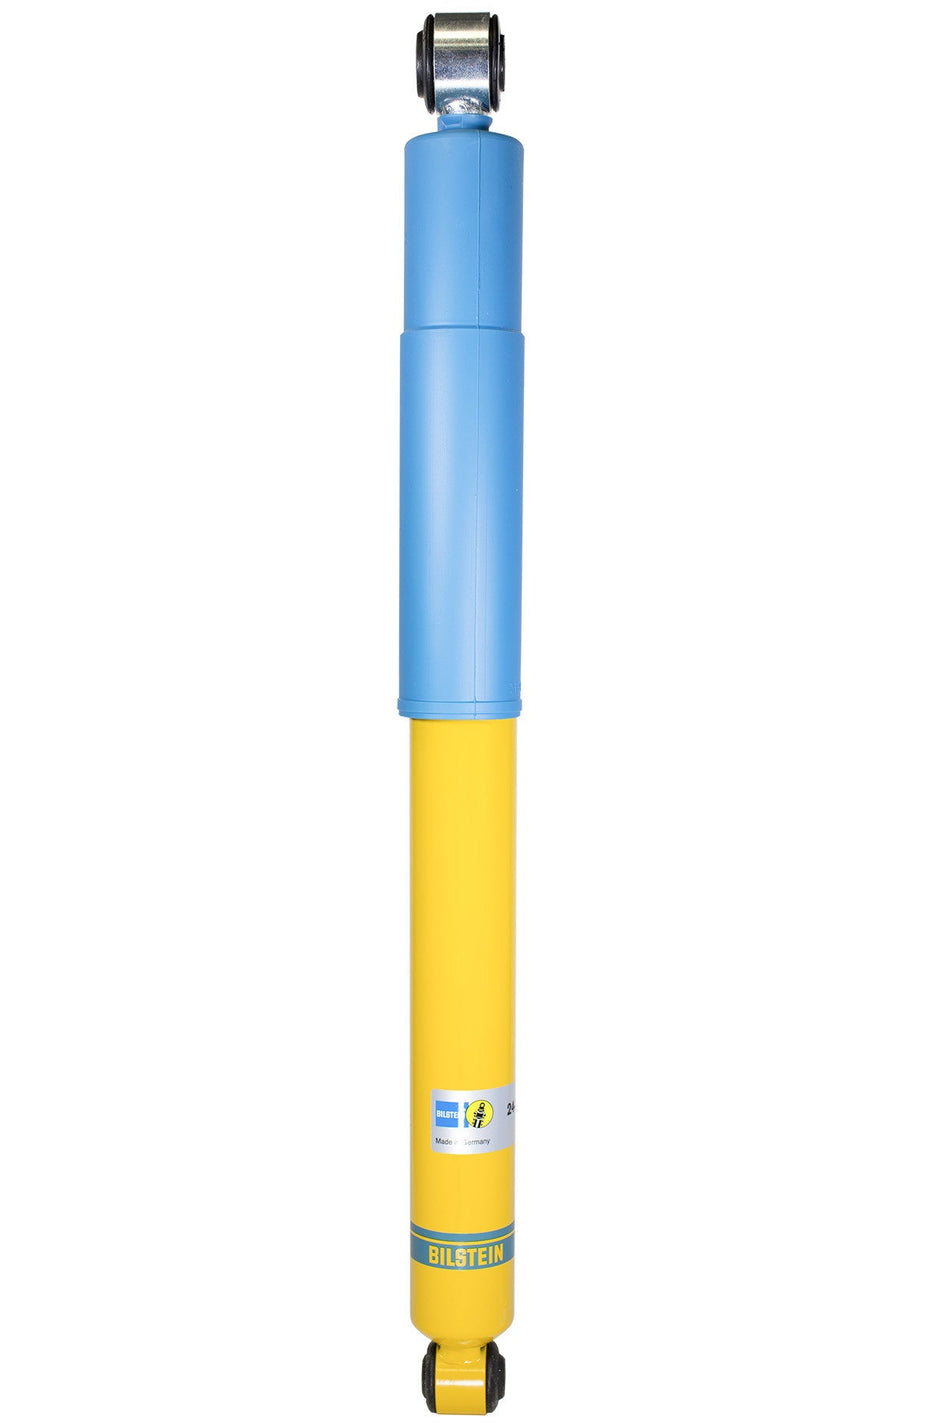 Bilstein Steering Dampener for Land Rover Discovery 1 (Heavy Duty) (1989-2004)